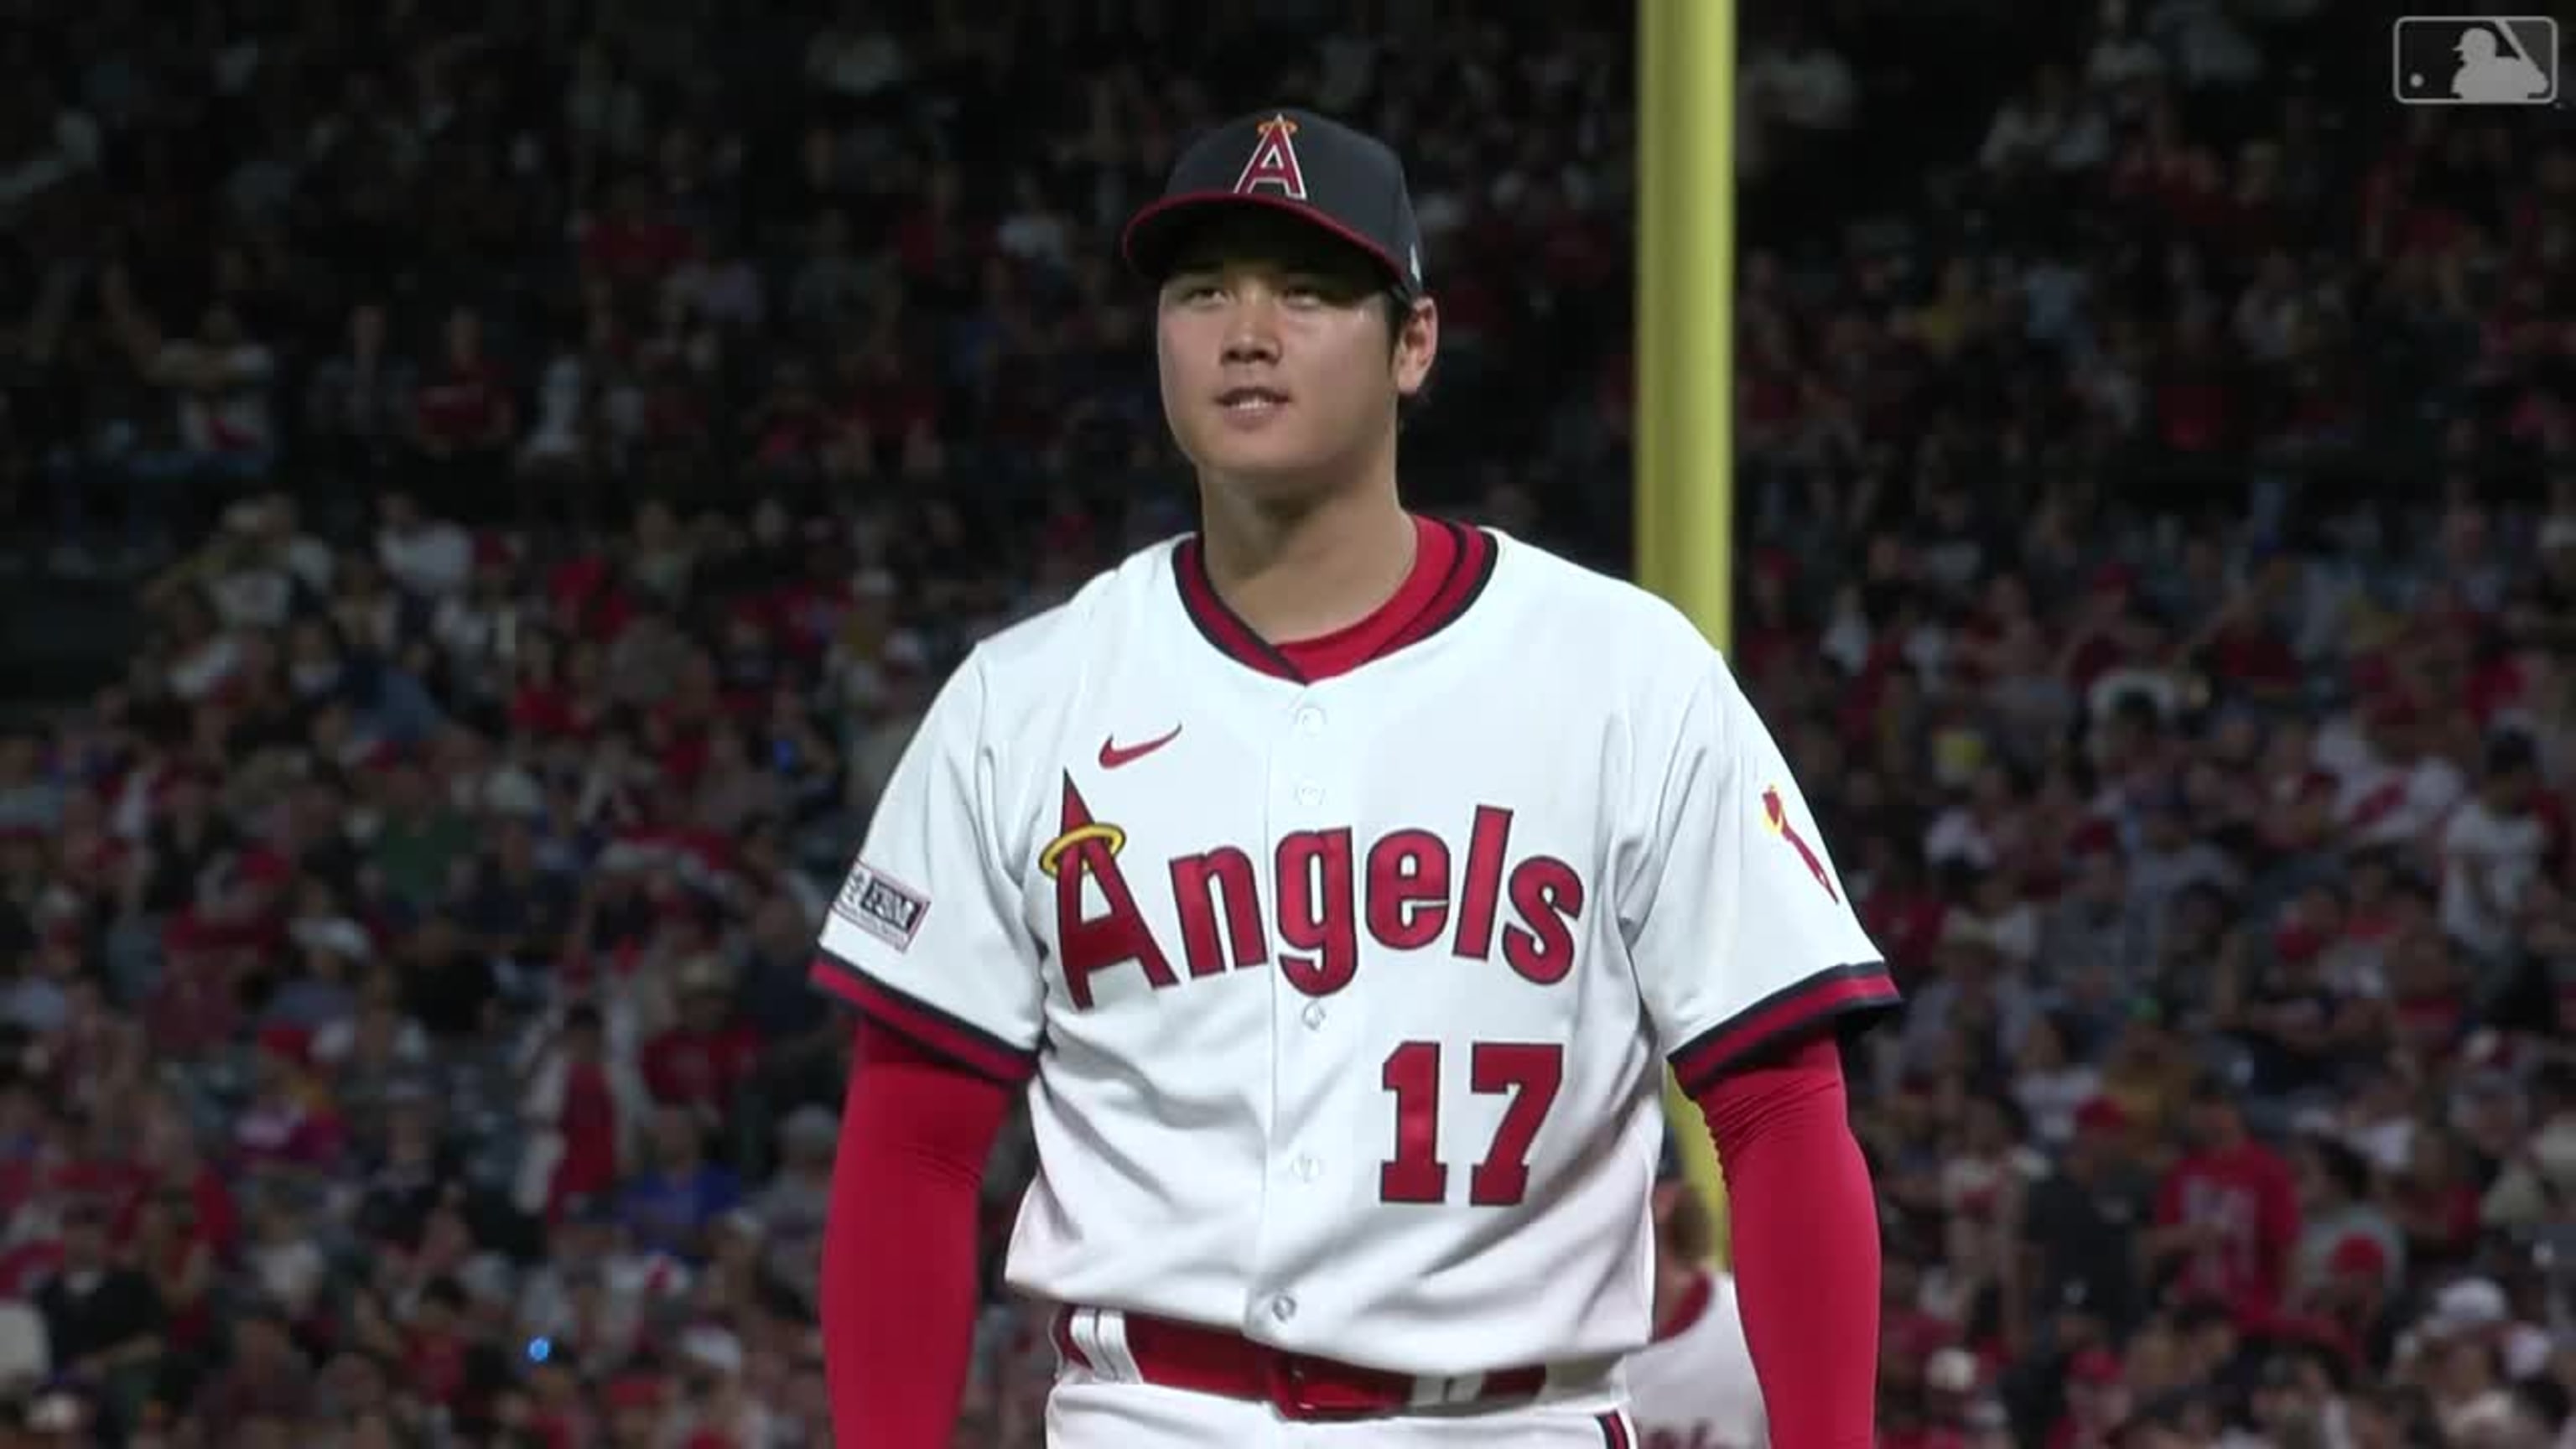 RUMOR: Cubs mentioned as potential Shohei Ohtani trade destination amid  Angels sale buzz